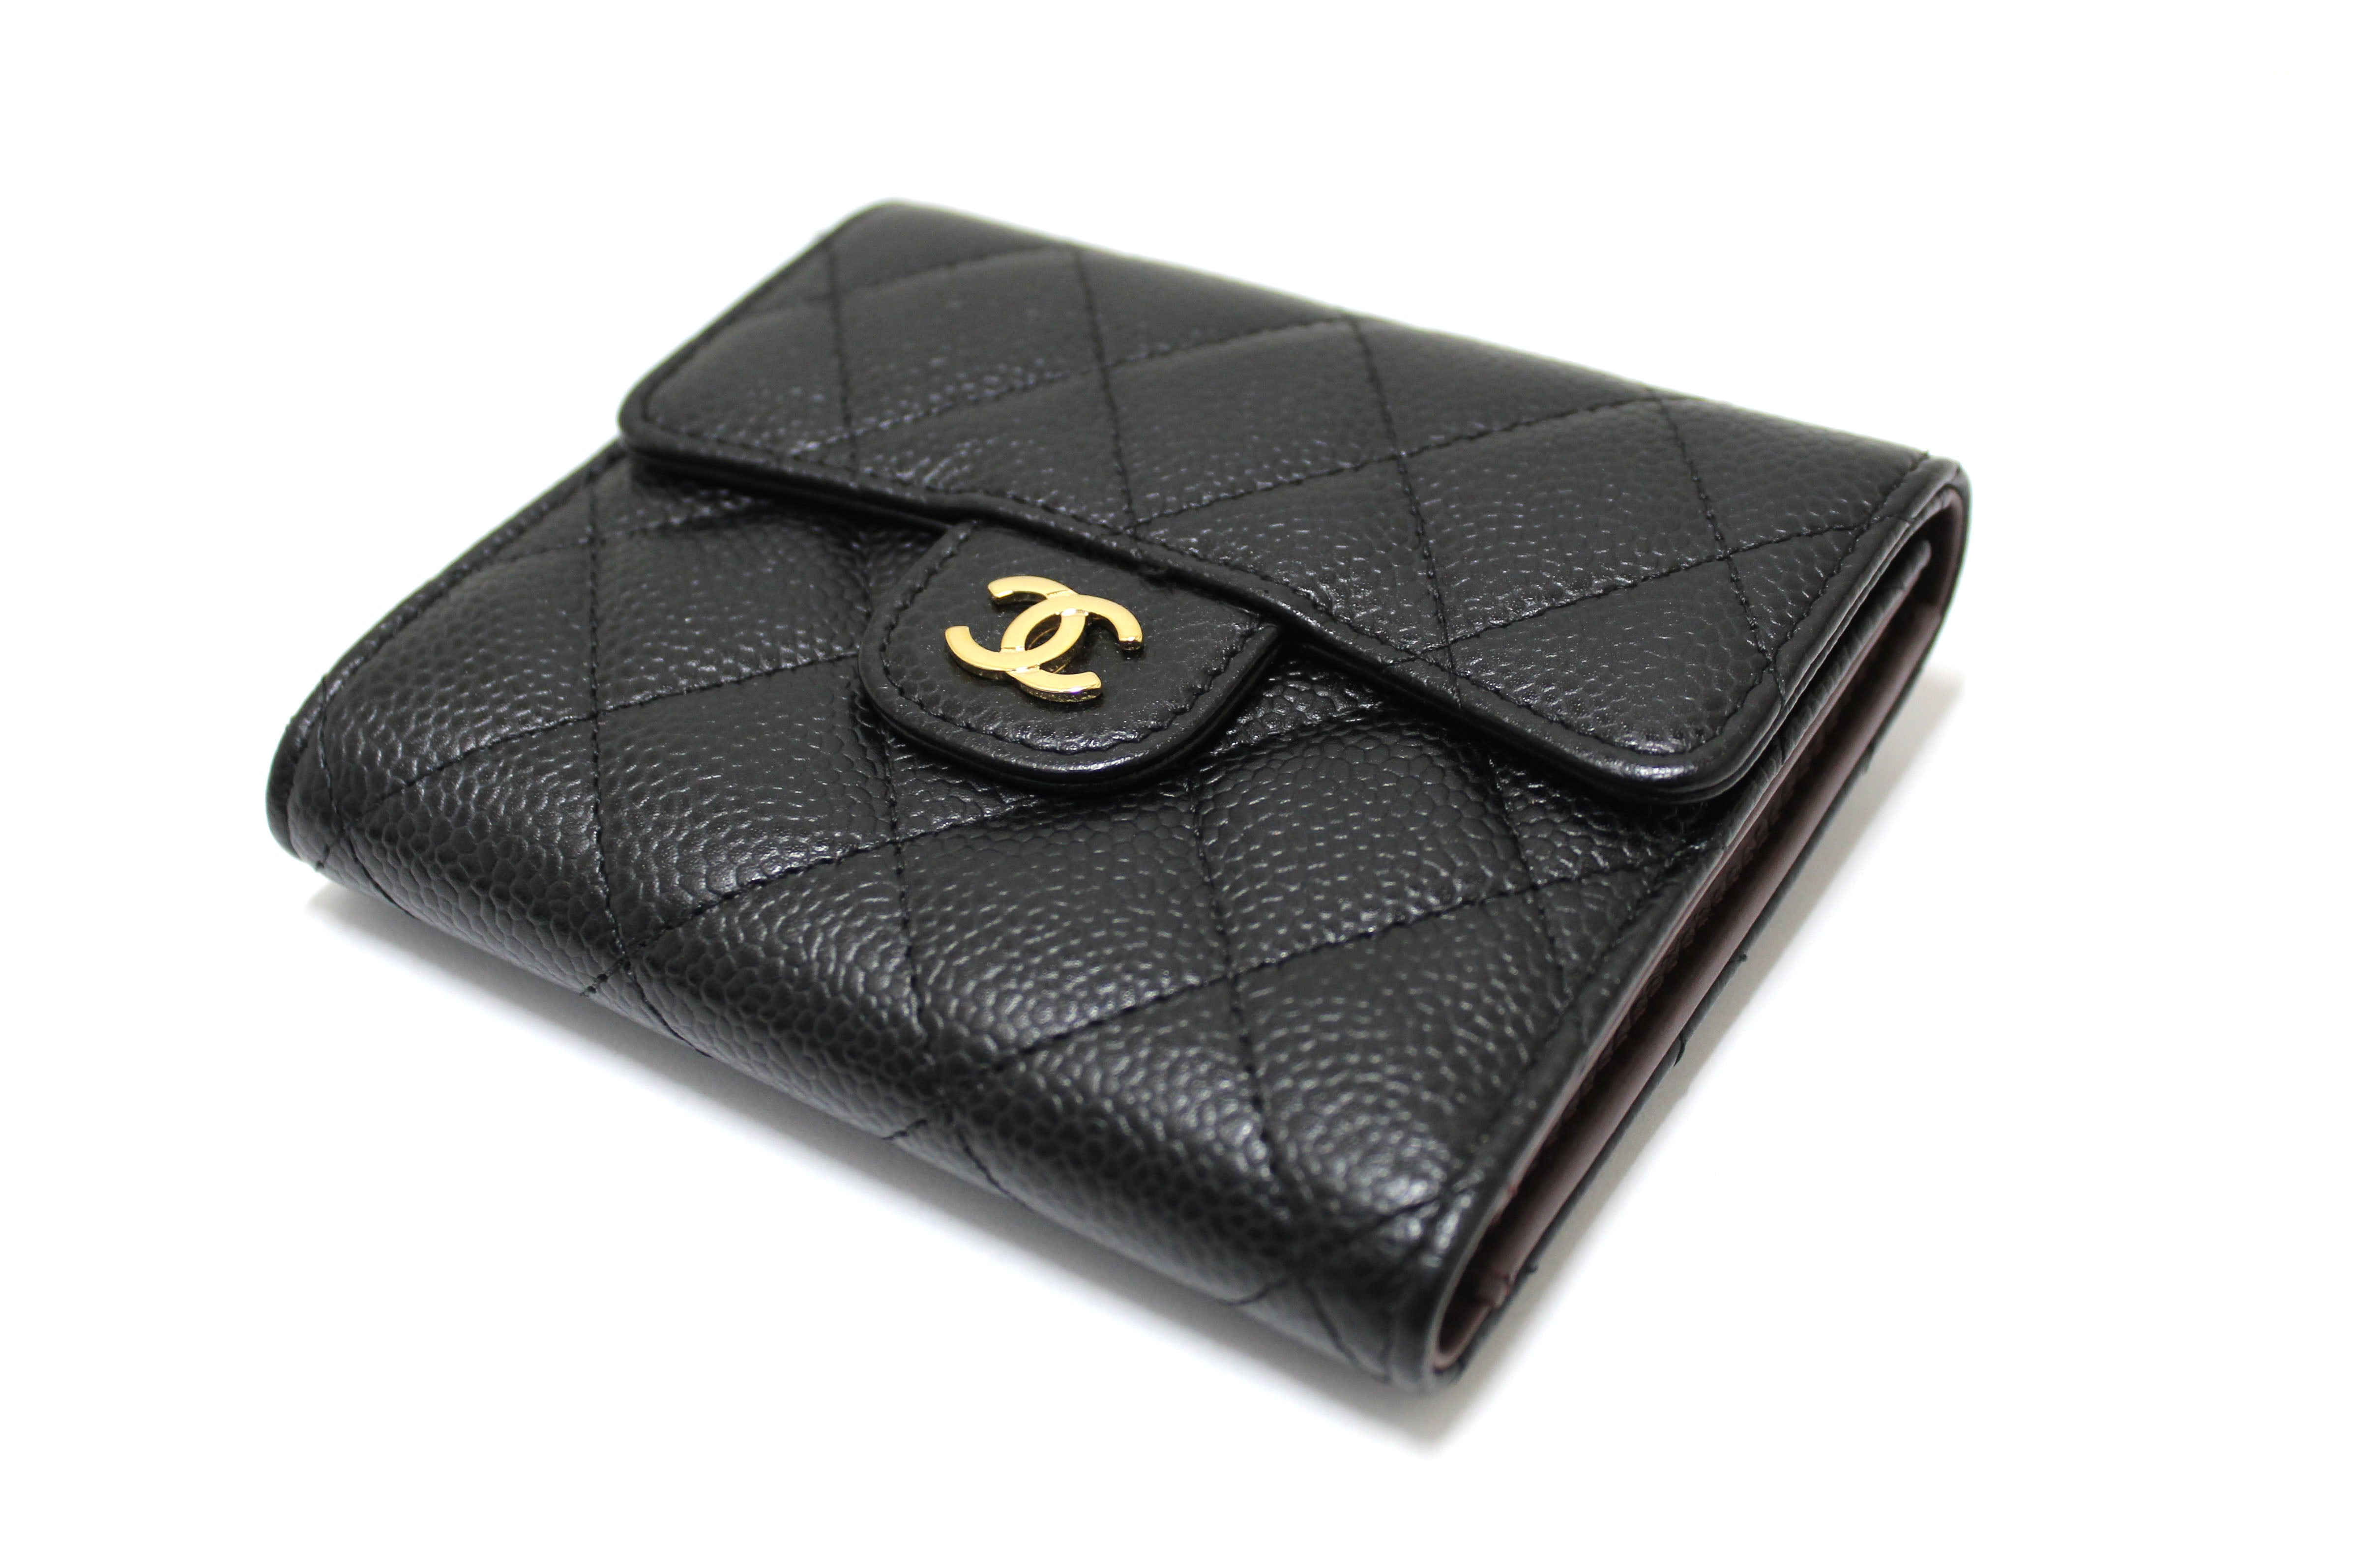 Authentic Chanel Black Quilted Caviar Leather Classic Small Flap Wallet